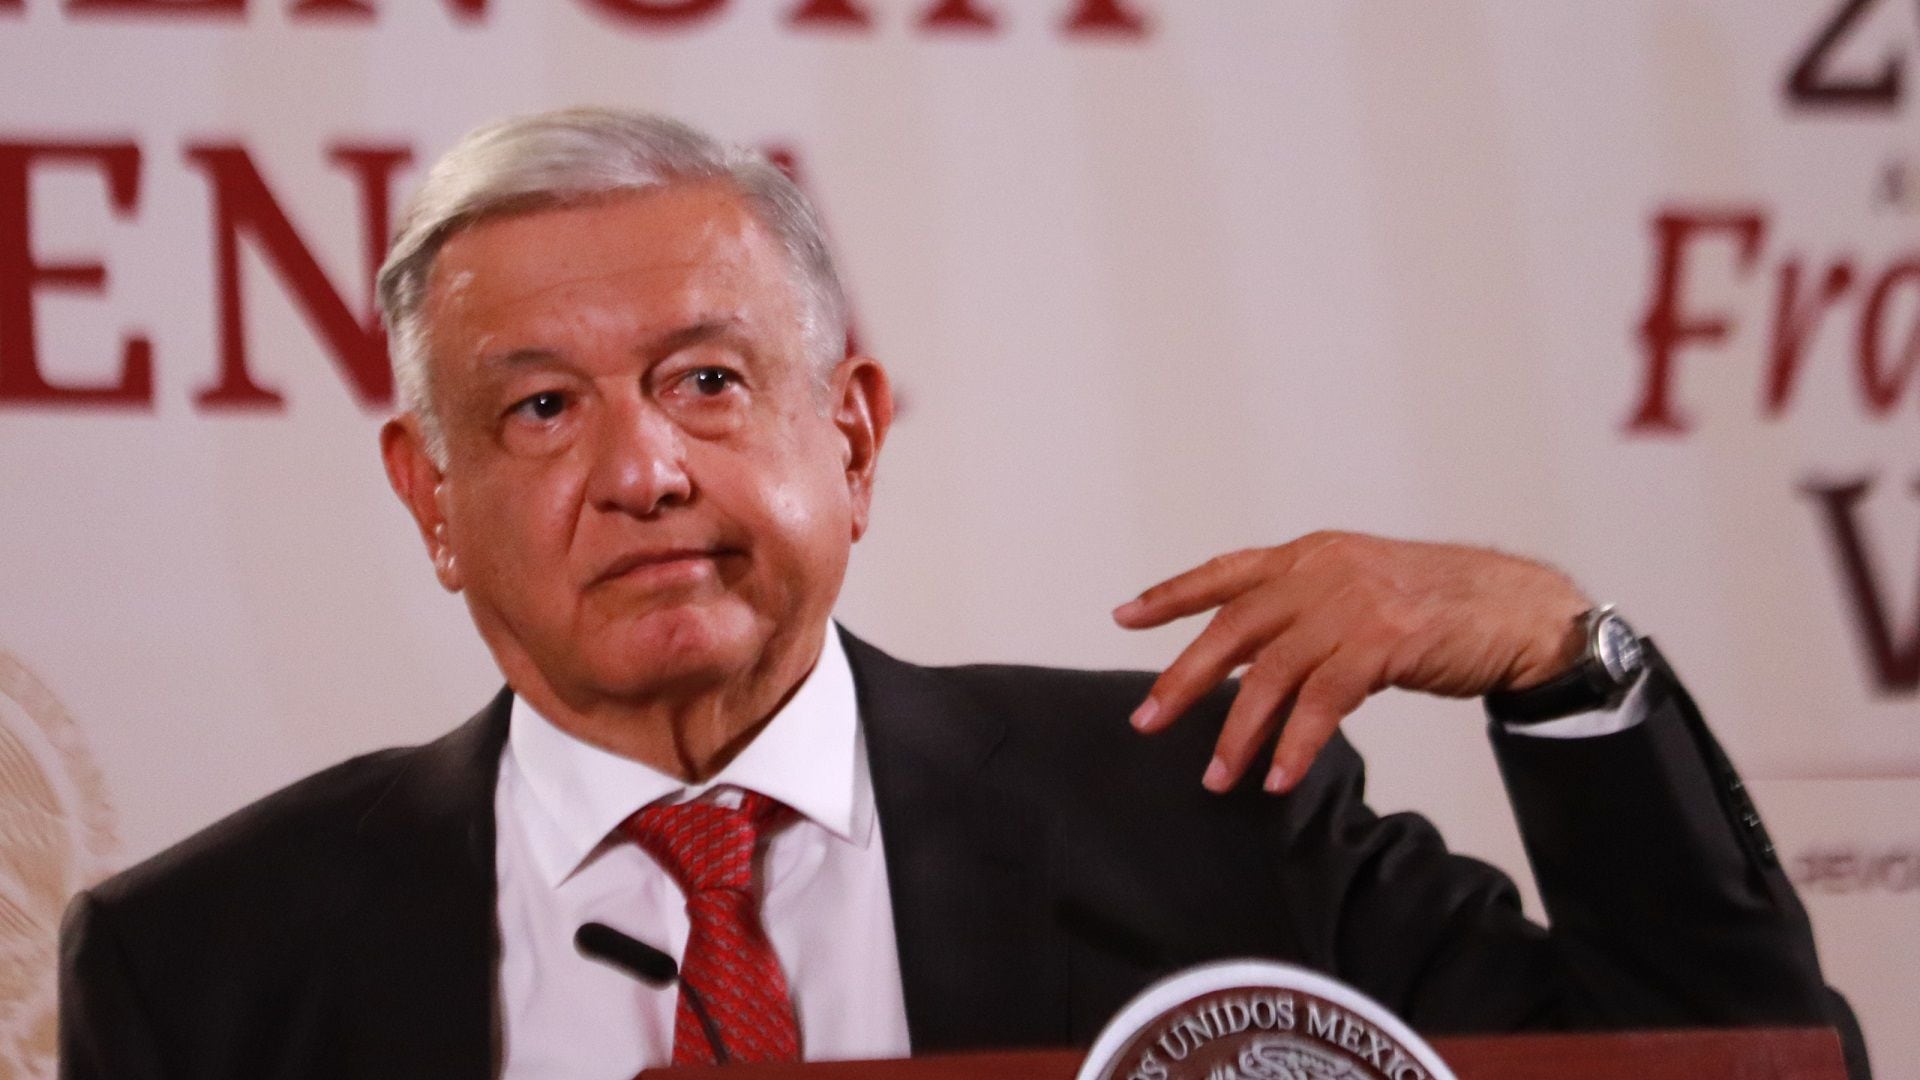 04/08/2023 August 04, 2023 in Mexico City, Mexico: President of Mexico, Andres Manuel Lopez Obrador, speaks during the morning news conference in front of reporters at the National Palace. on August 04, 2023 in Mexico City, Mexico.
POLITICA 
Europa Press/Contacto/Carlos Santiago